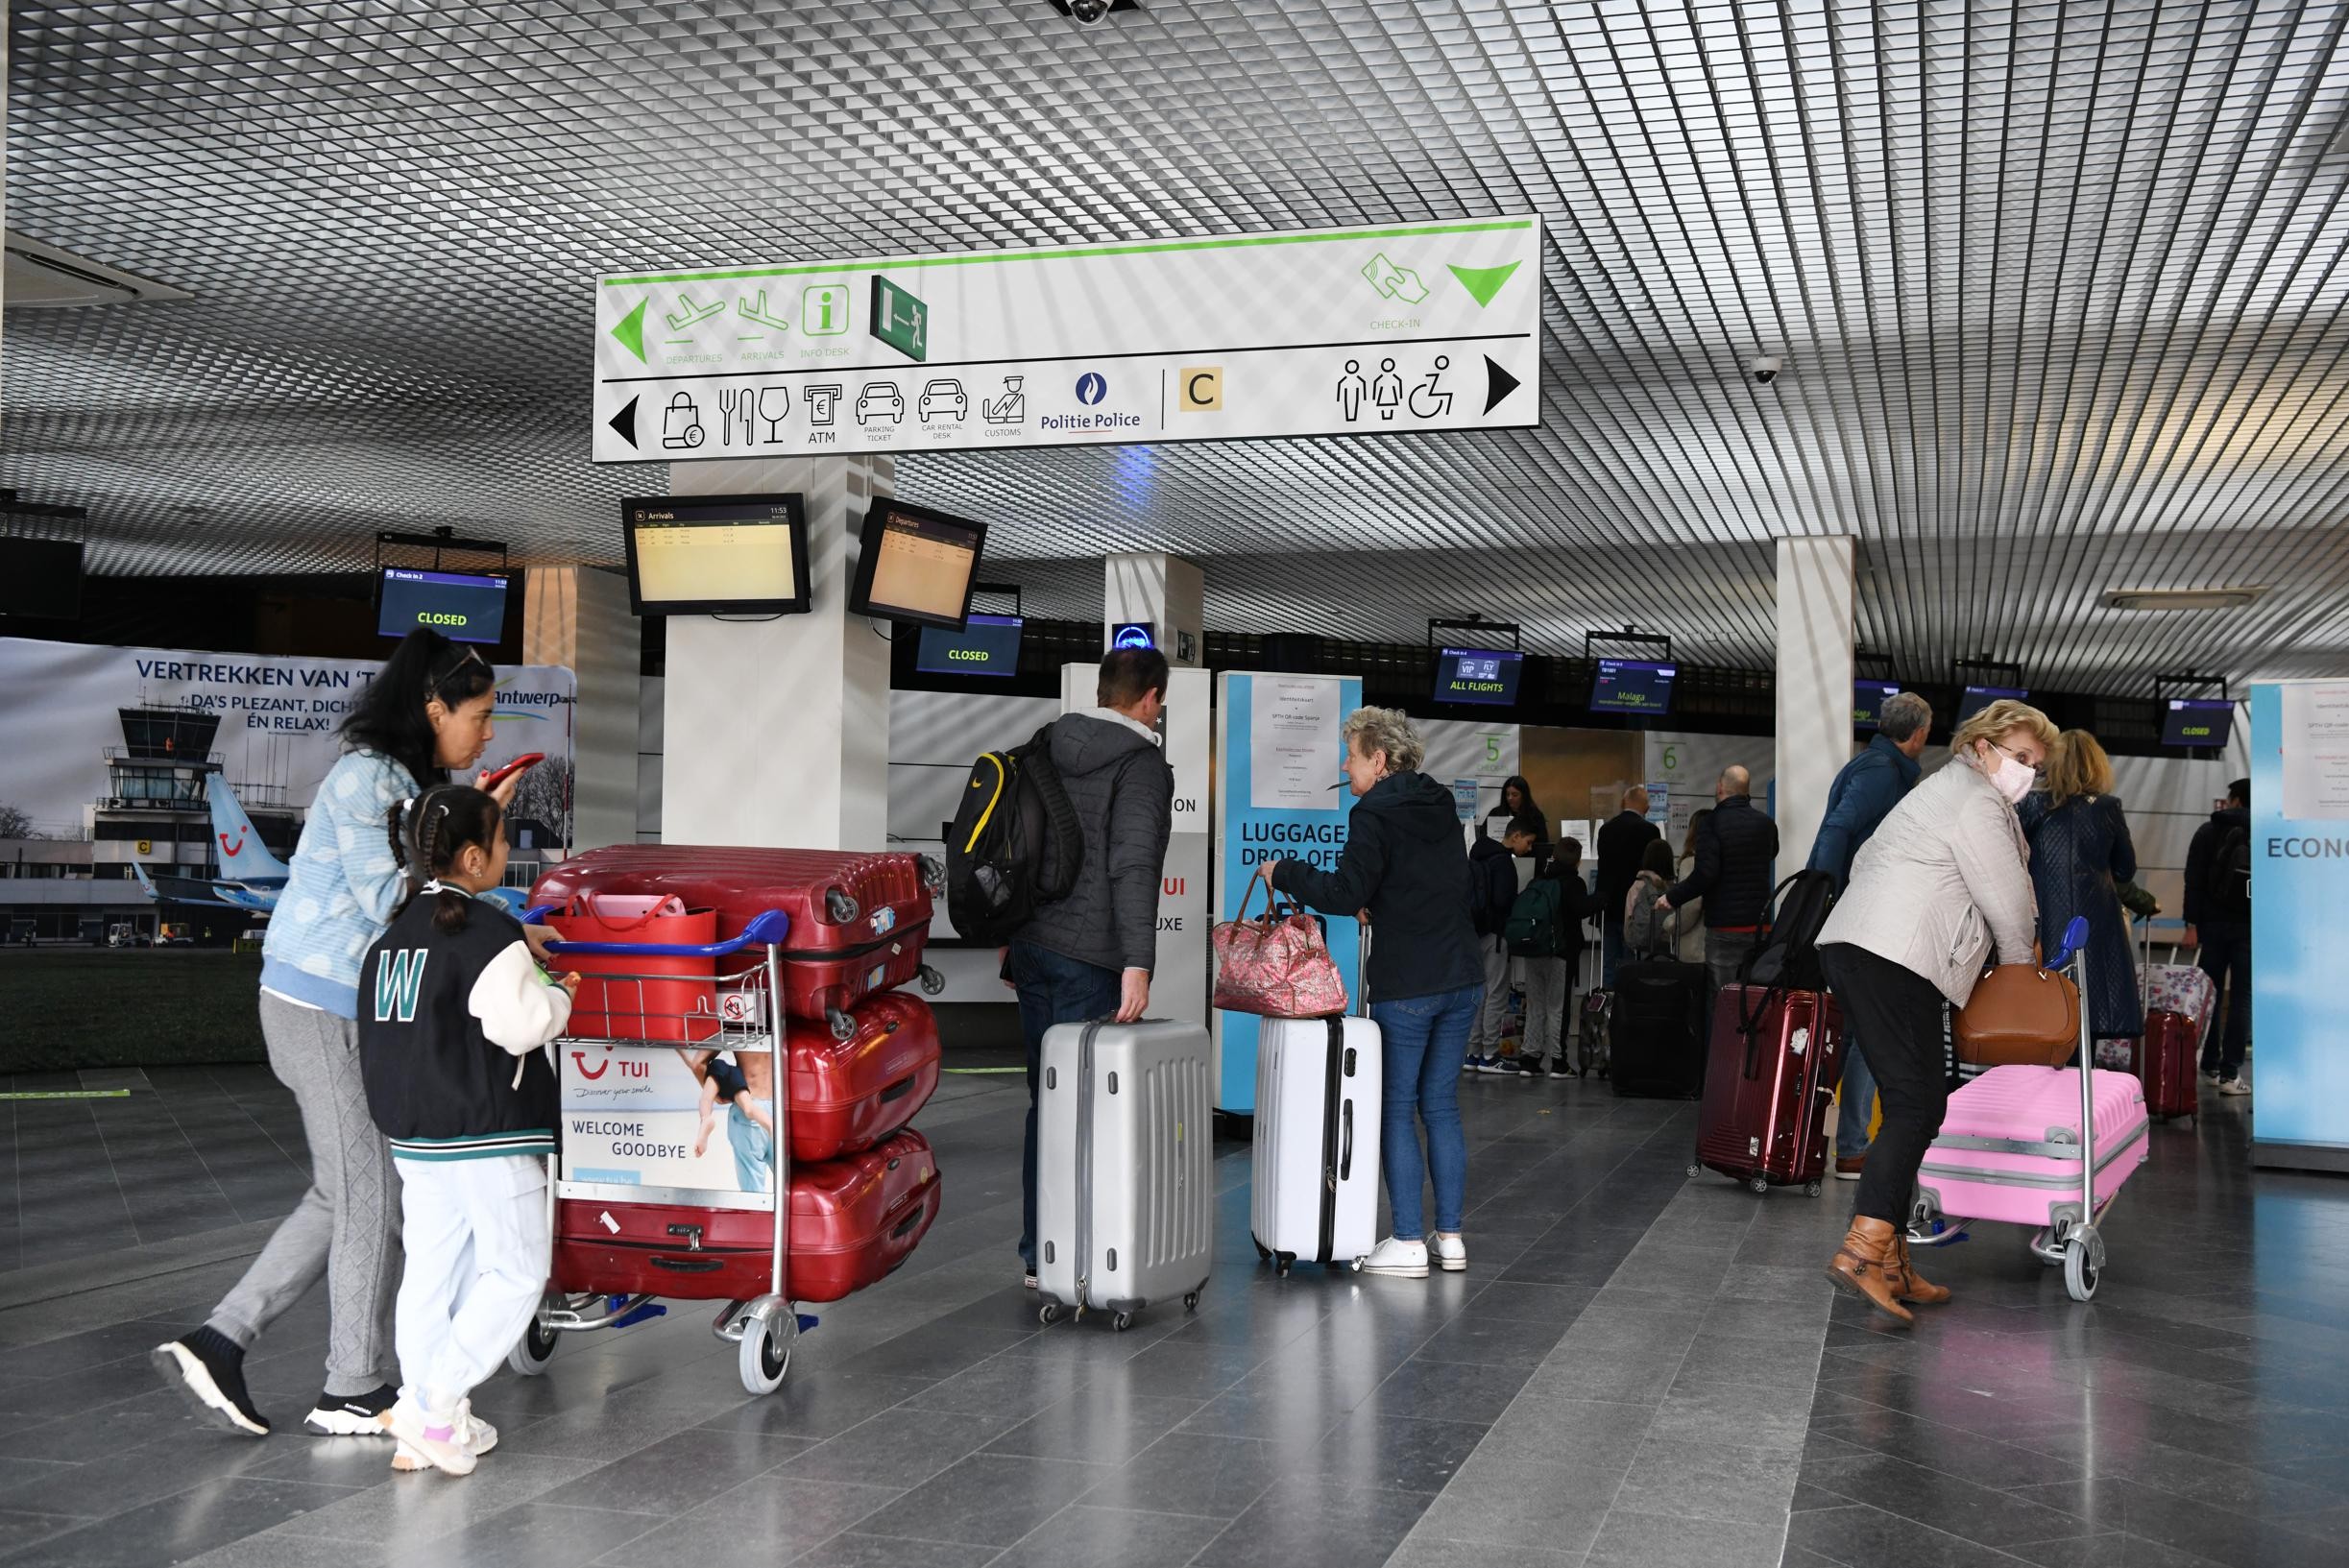 Passenger numbers are increasing at Antwerp Airport: “More and more people are starting to travel again.”